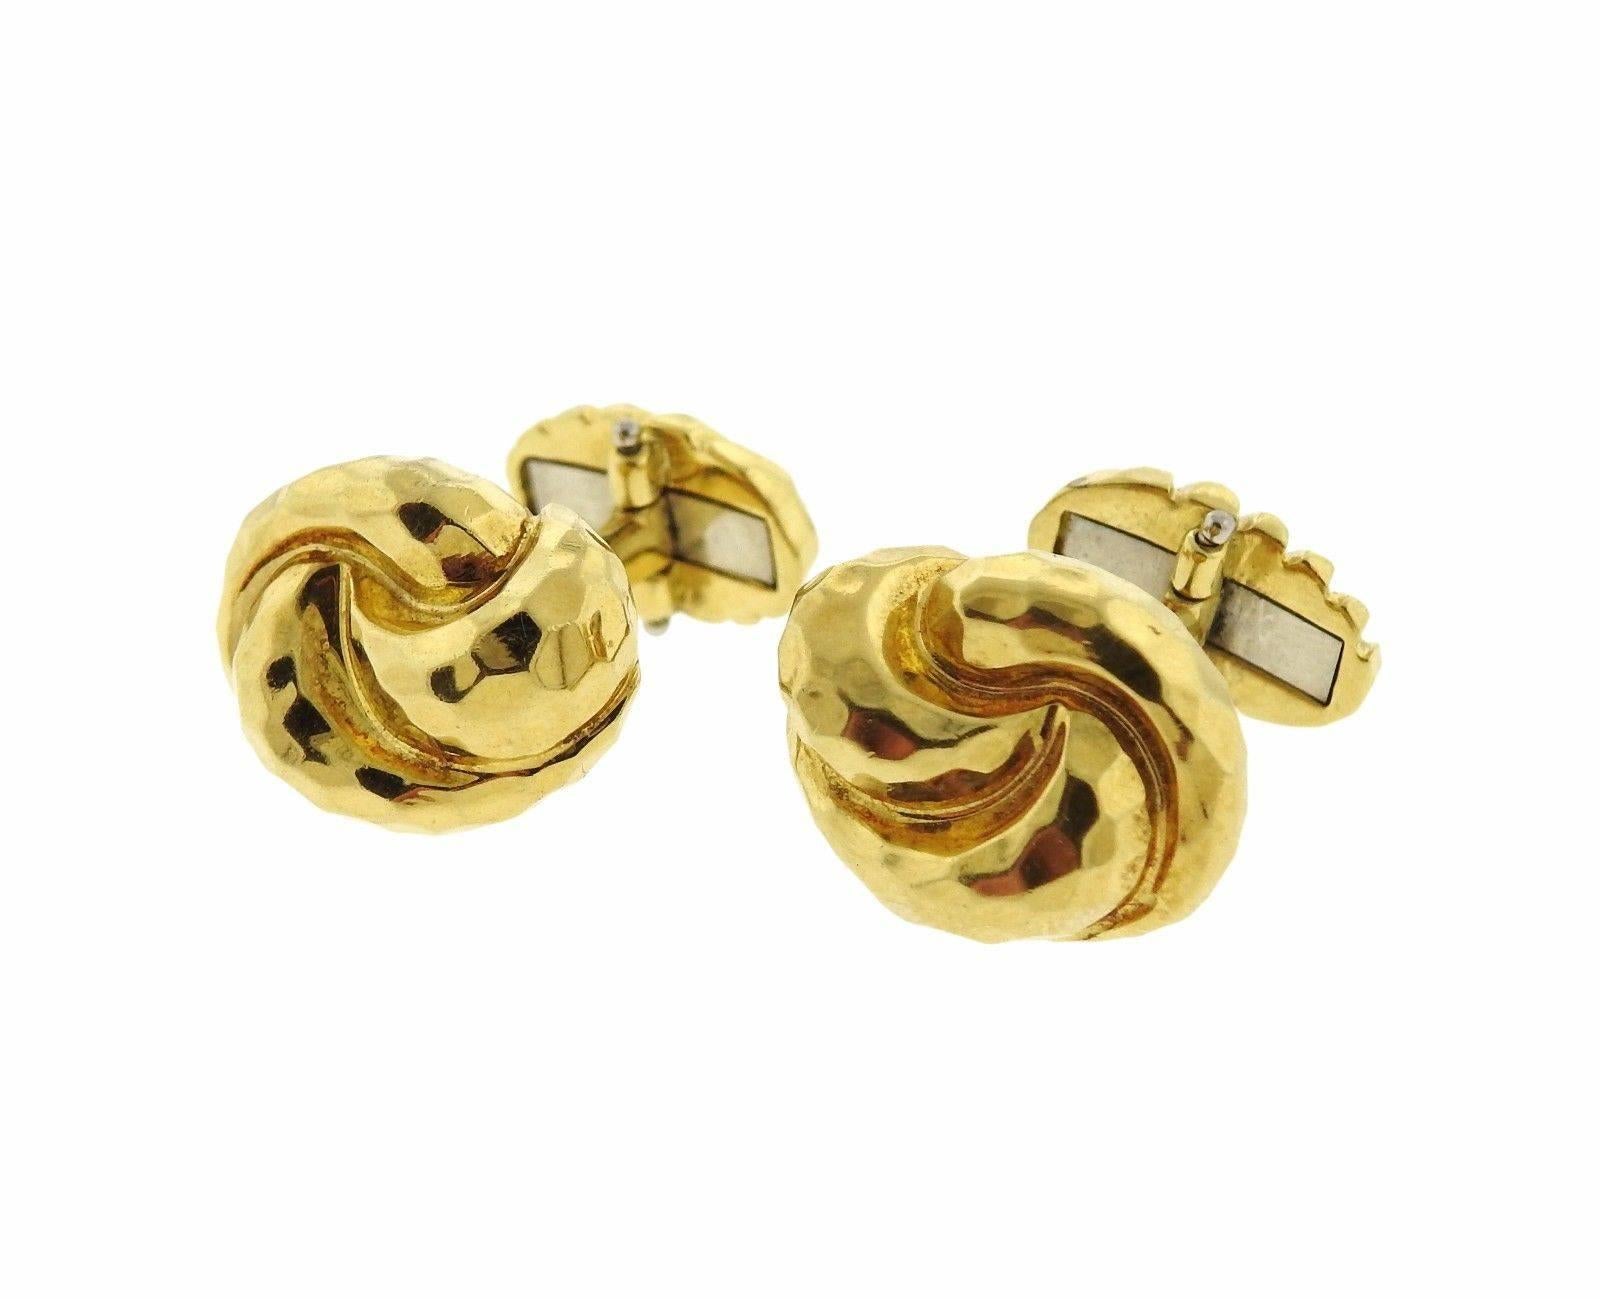 18k Hammered Gold Cufflinks by Henry Dunay. Cufflink tops measure 17mm X 12mm and 12mm X 9mm and are marked 18k dunay 750. Cufflinks weigh 19.8 grams. 